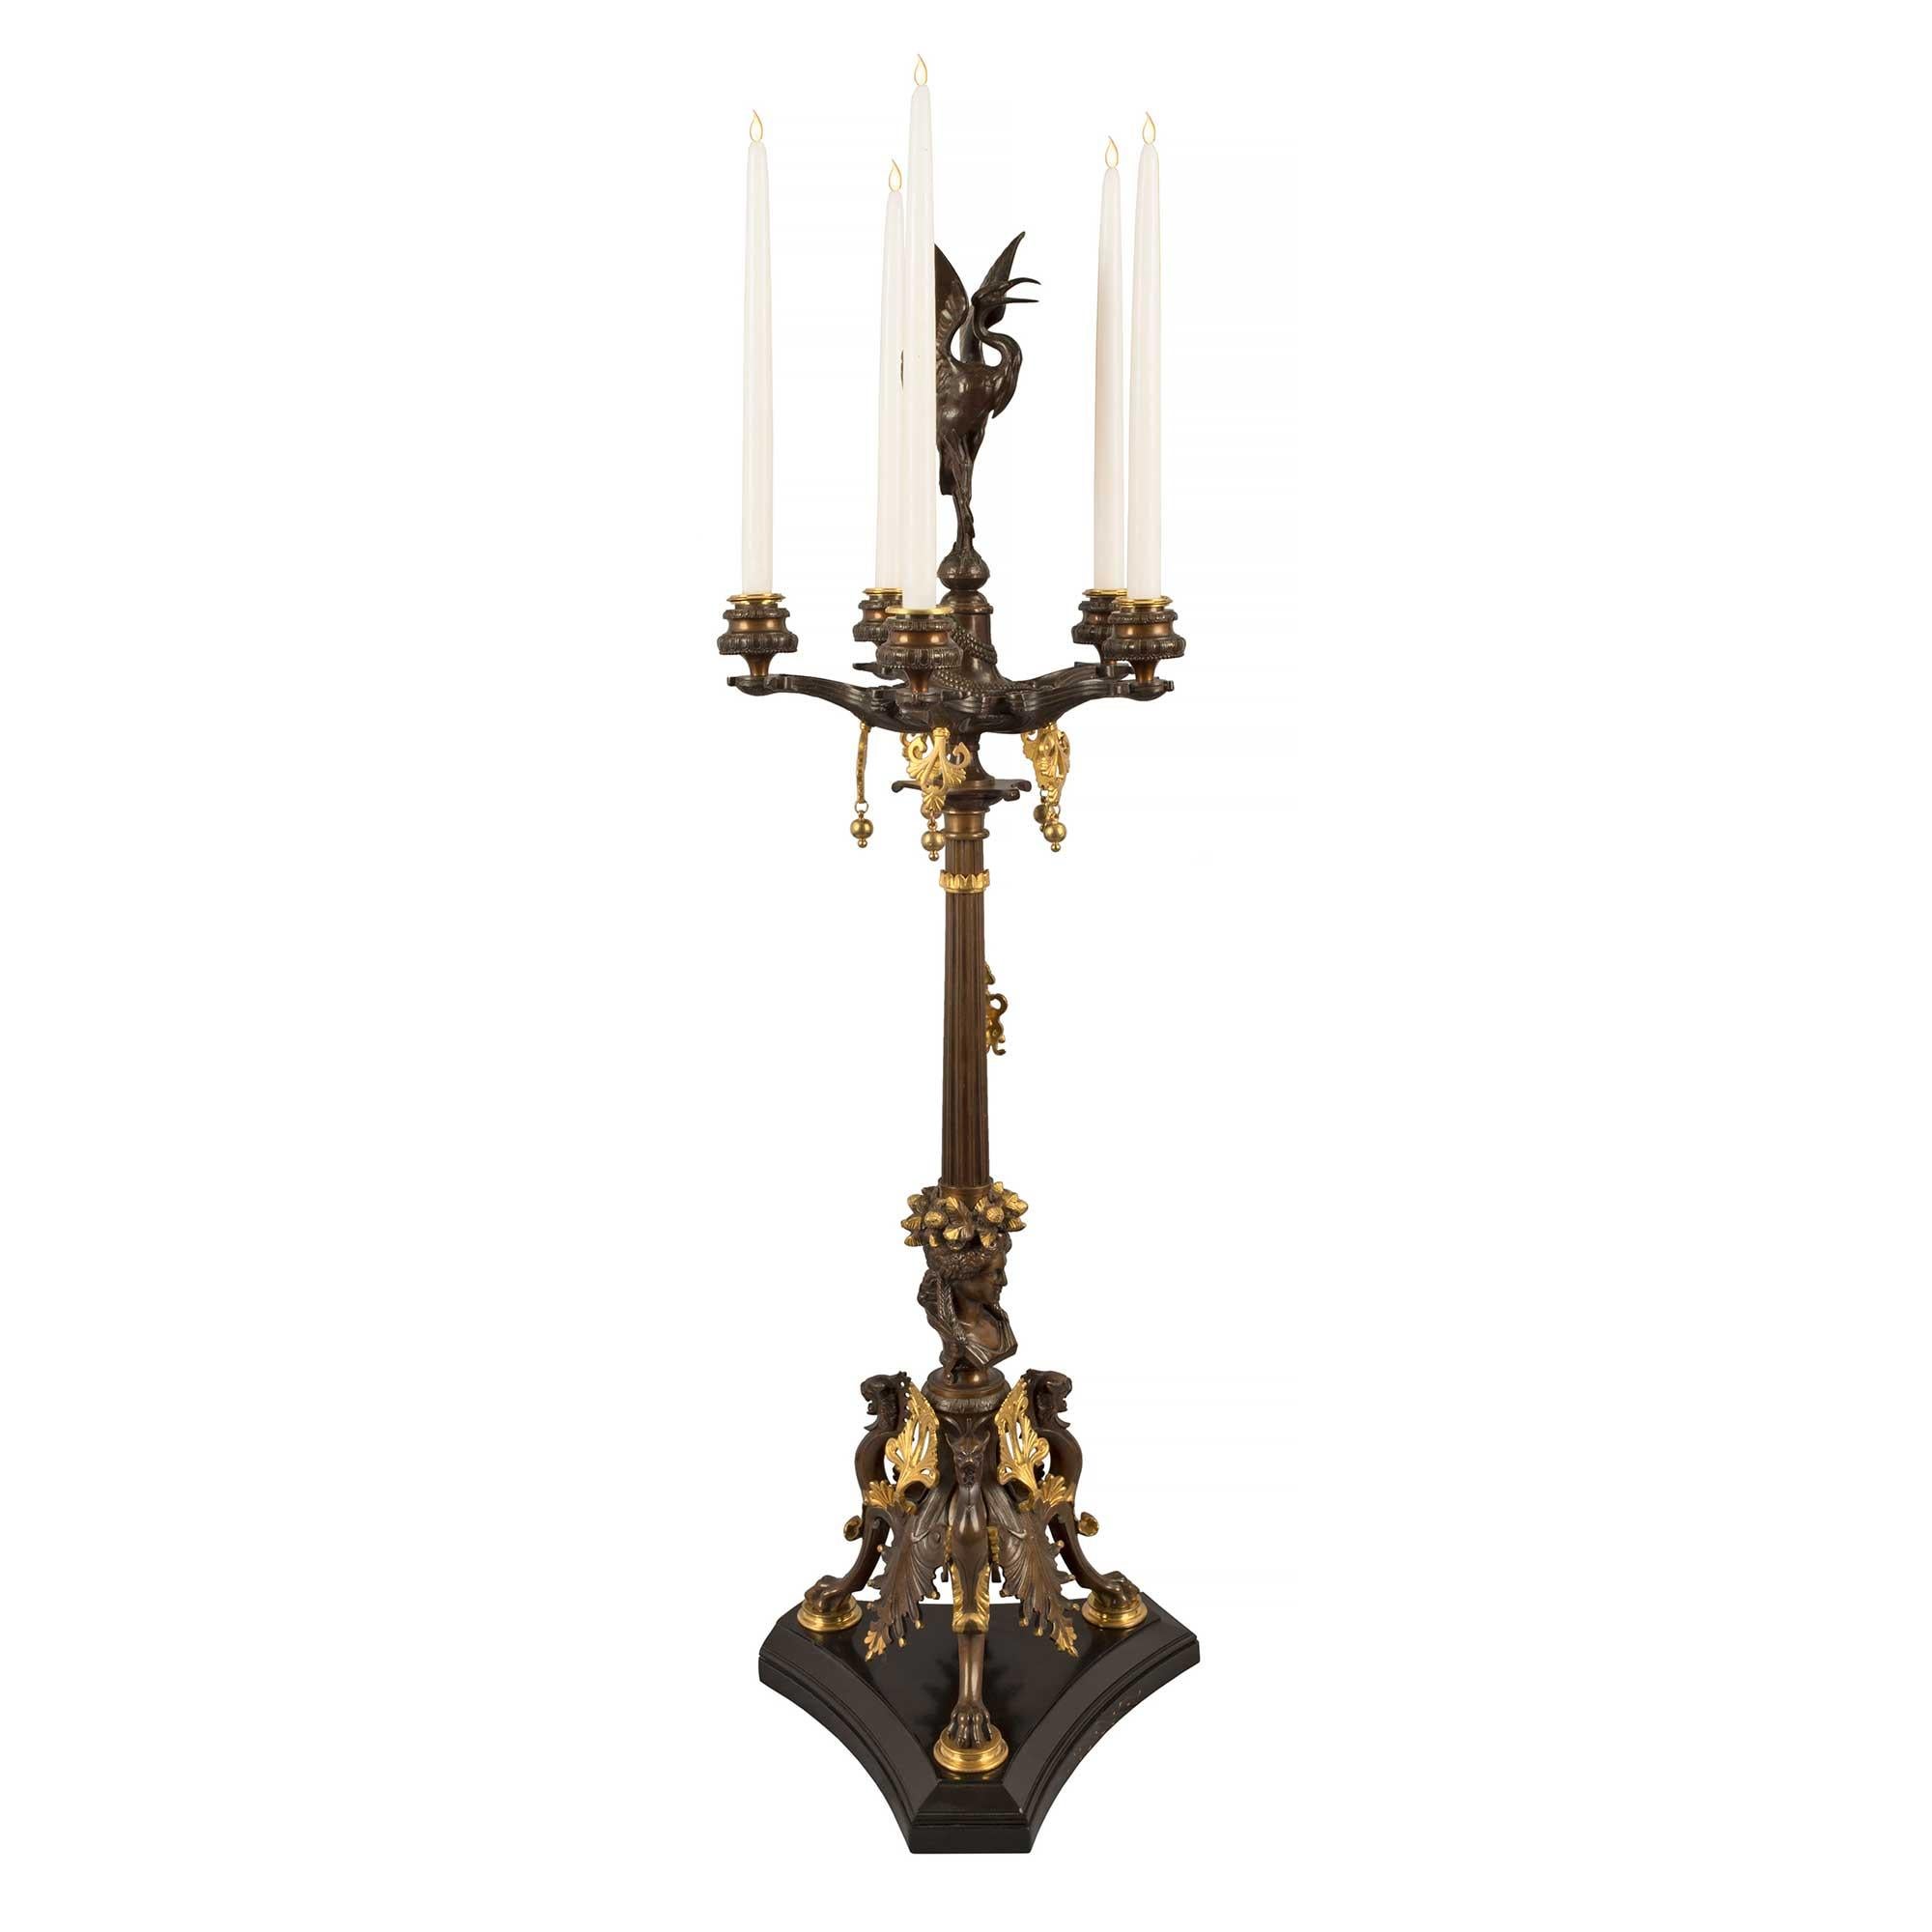 A stunning true pair of French 19th century Renaissance st. black Belgian marble, ormolu and patinated bronze, five arm candelabras, attributed to F. Barbedienne. Each candelabra is raised by a triangular black Belgian marble base with concave